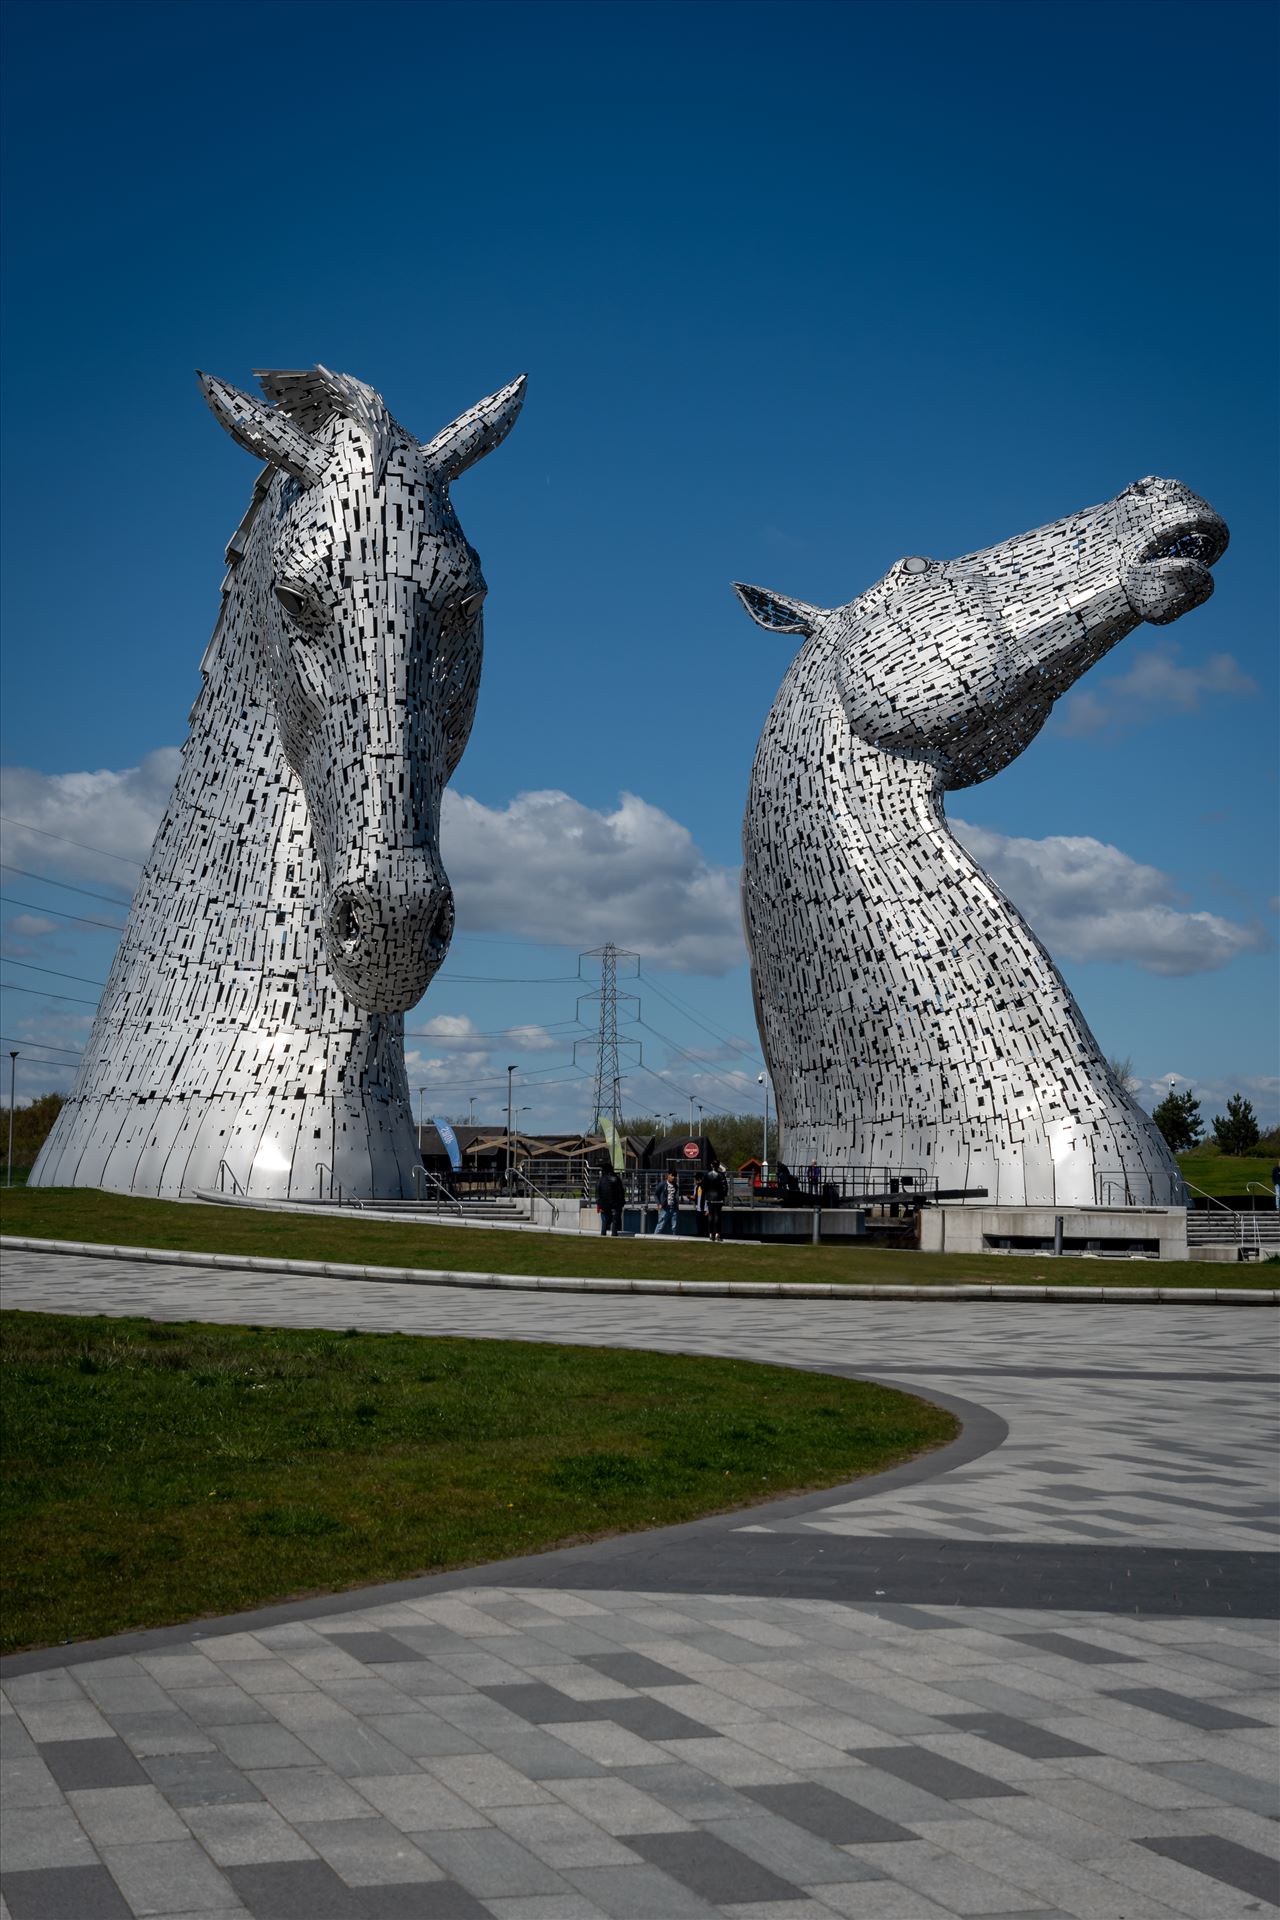 'The Kelpies', Falkirk, Scotland Built of structural steel with a stainless steel cladding, The Kelpies are 30 metres high and weigh 300 tonnes each. Construction began in June 2013, and was complete by October 2013. by Graham Dobson Photography